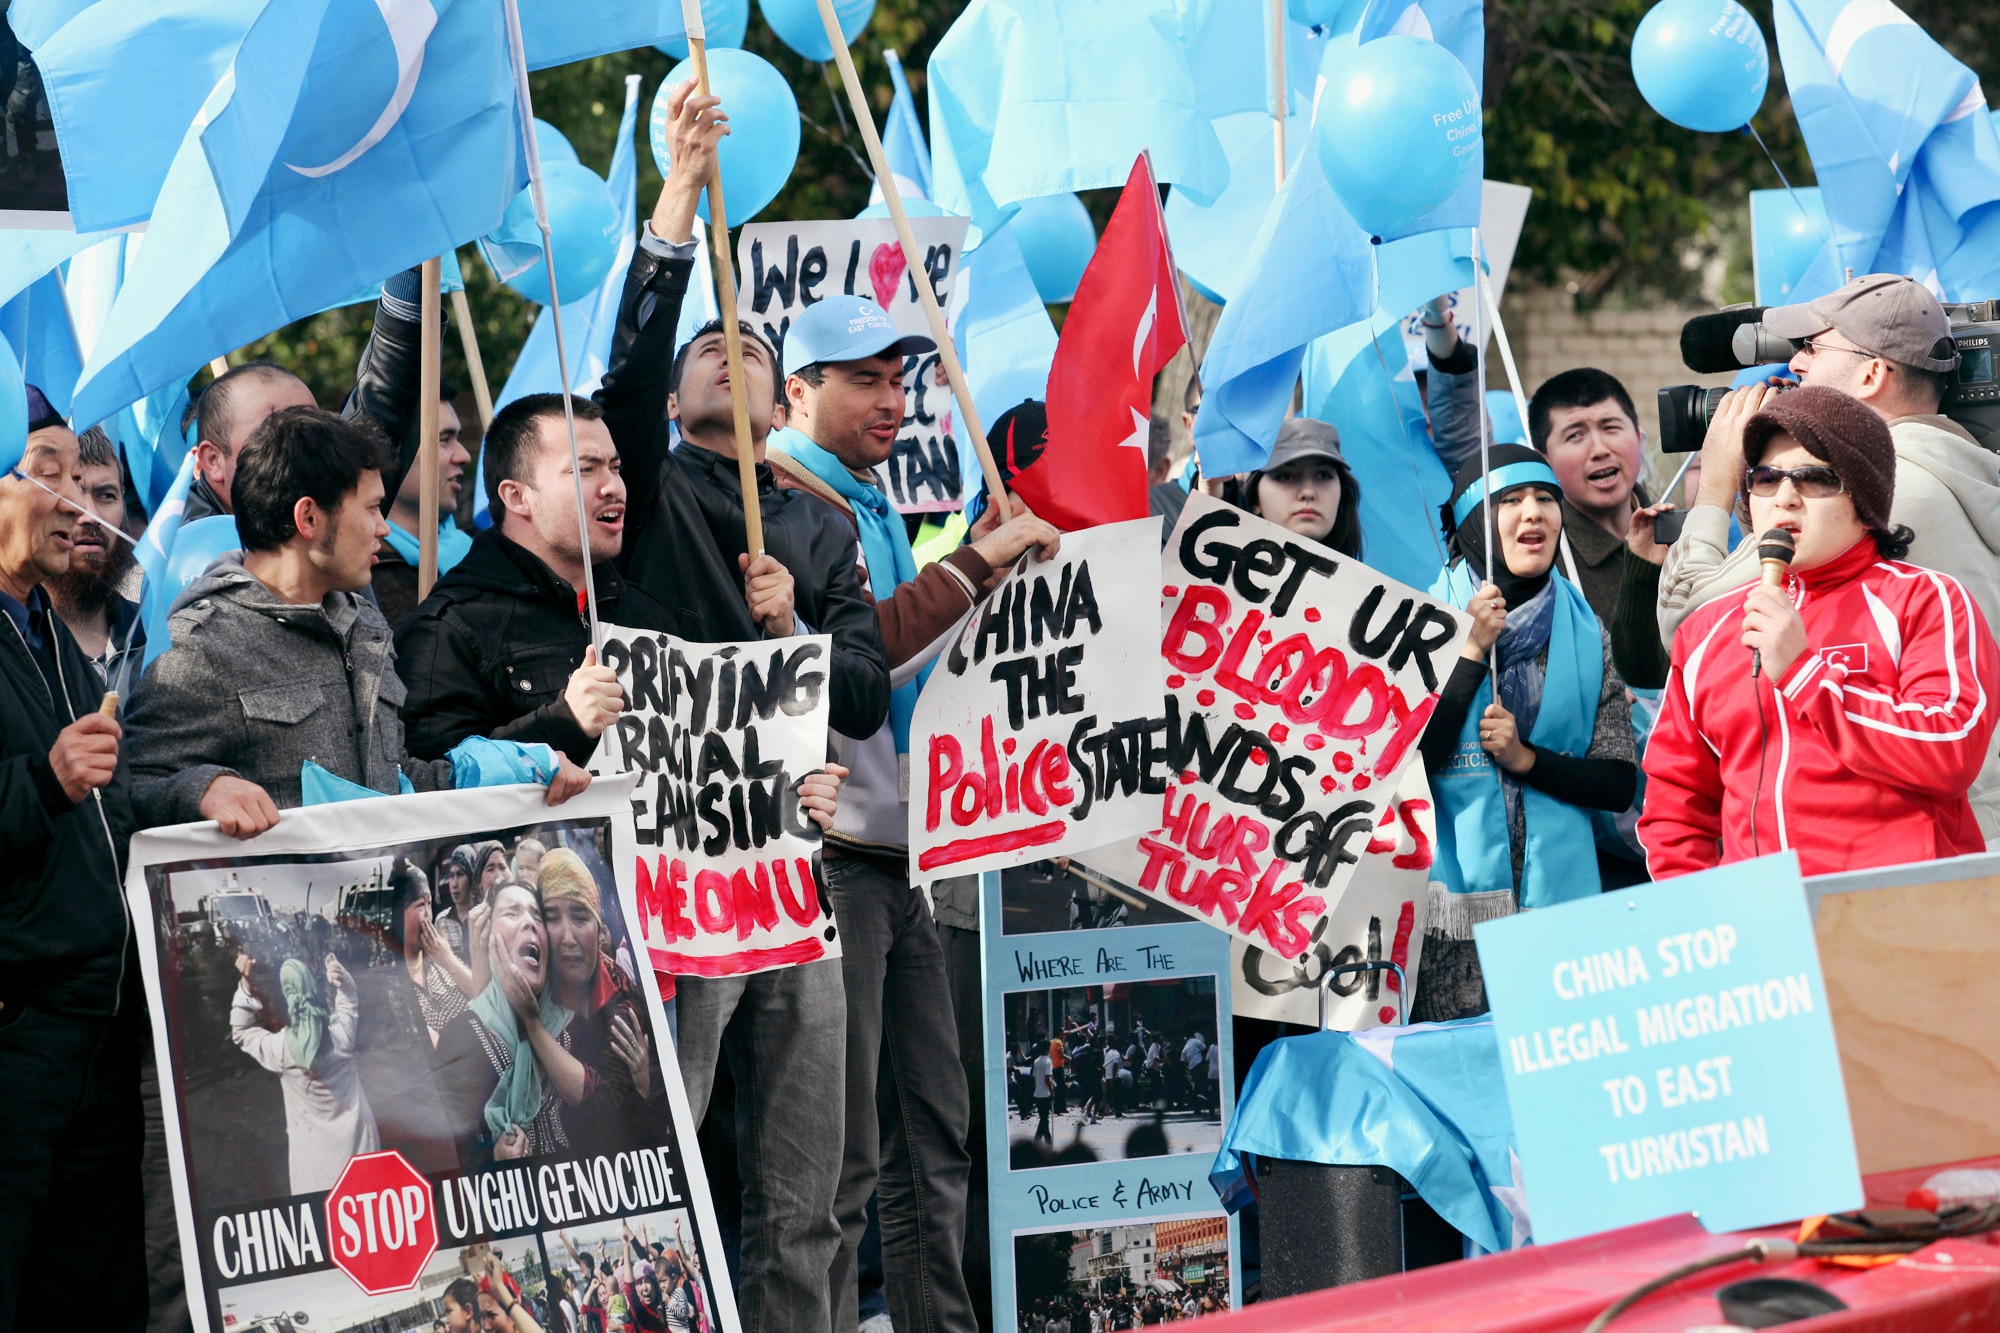 Members of Australia's Uighur community have told a Senate inquiry about the “intimidation and harassment” they face.